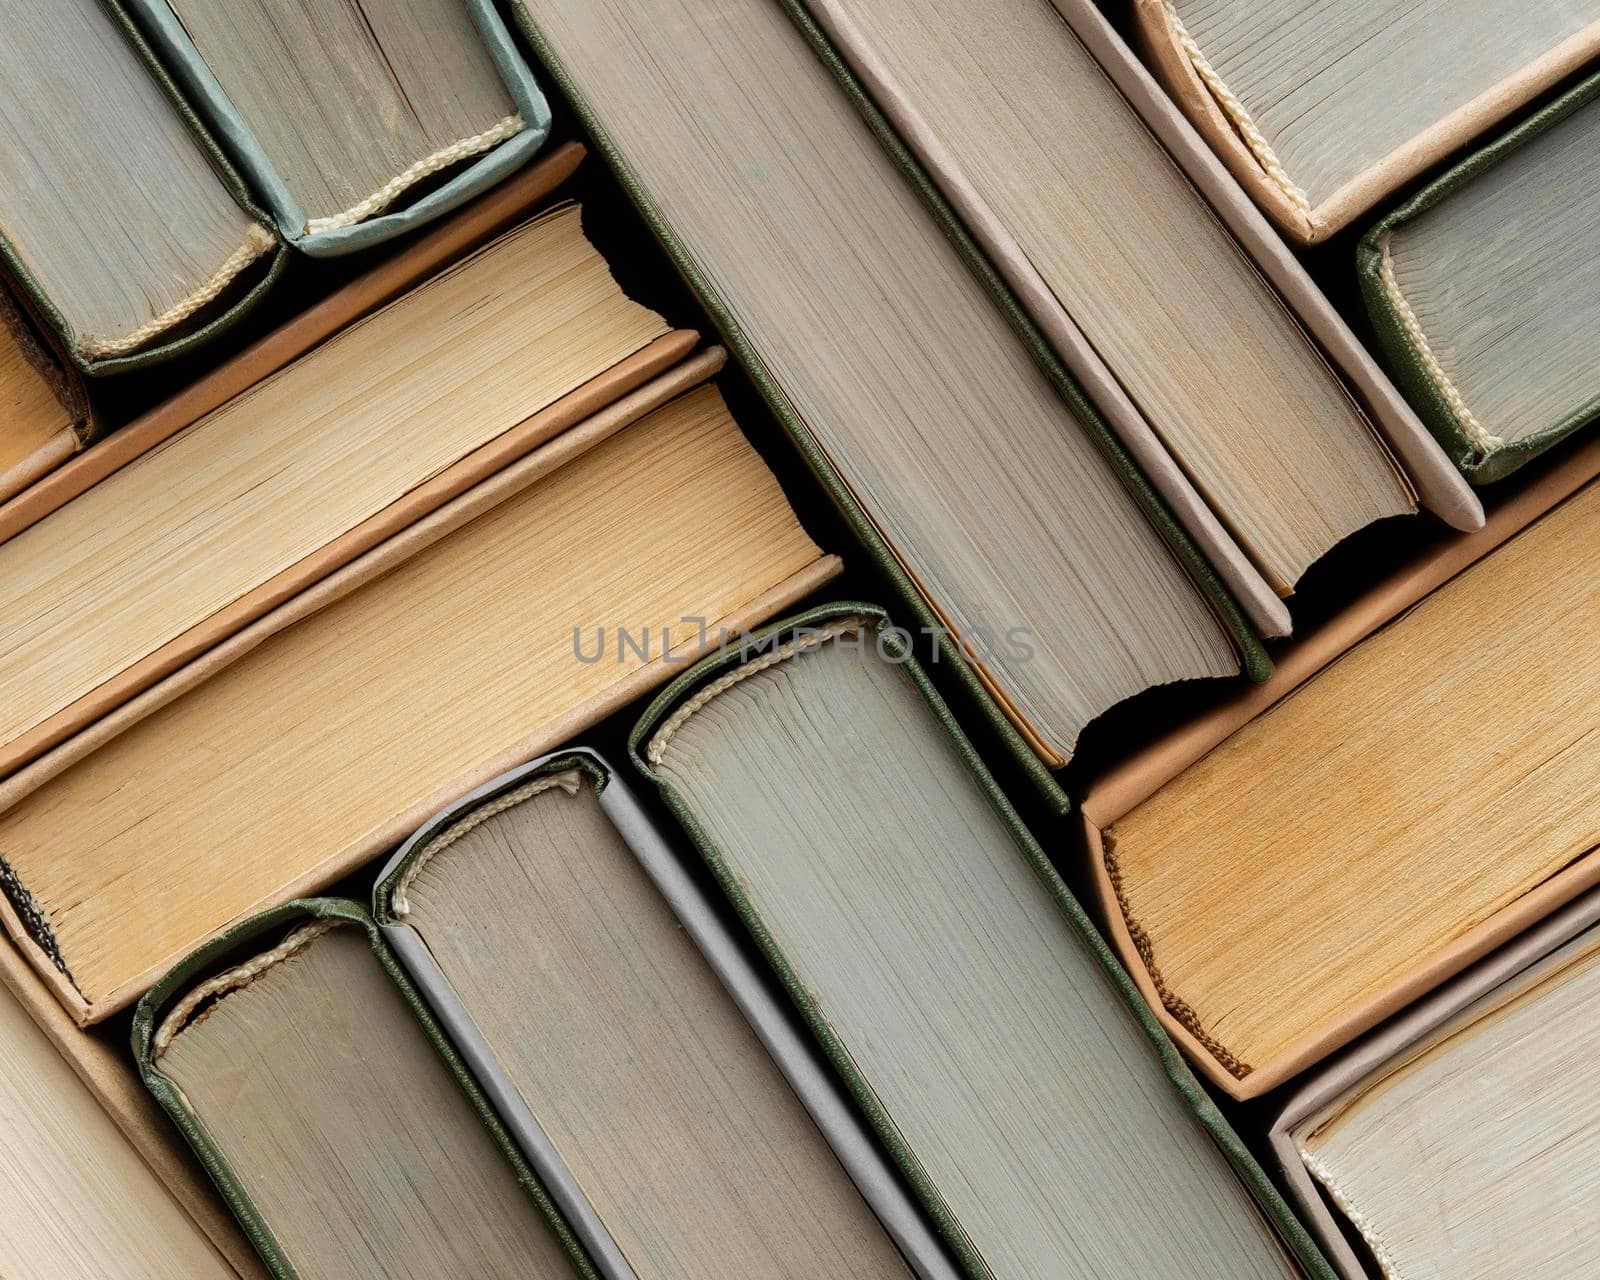 creative composition with different books_2